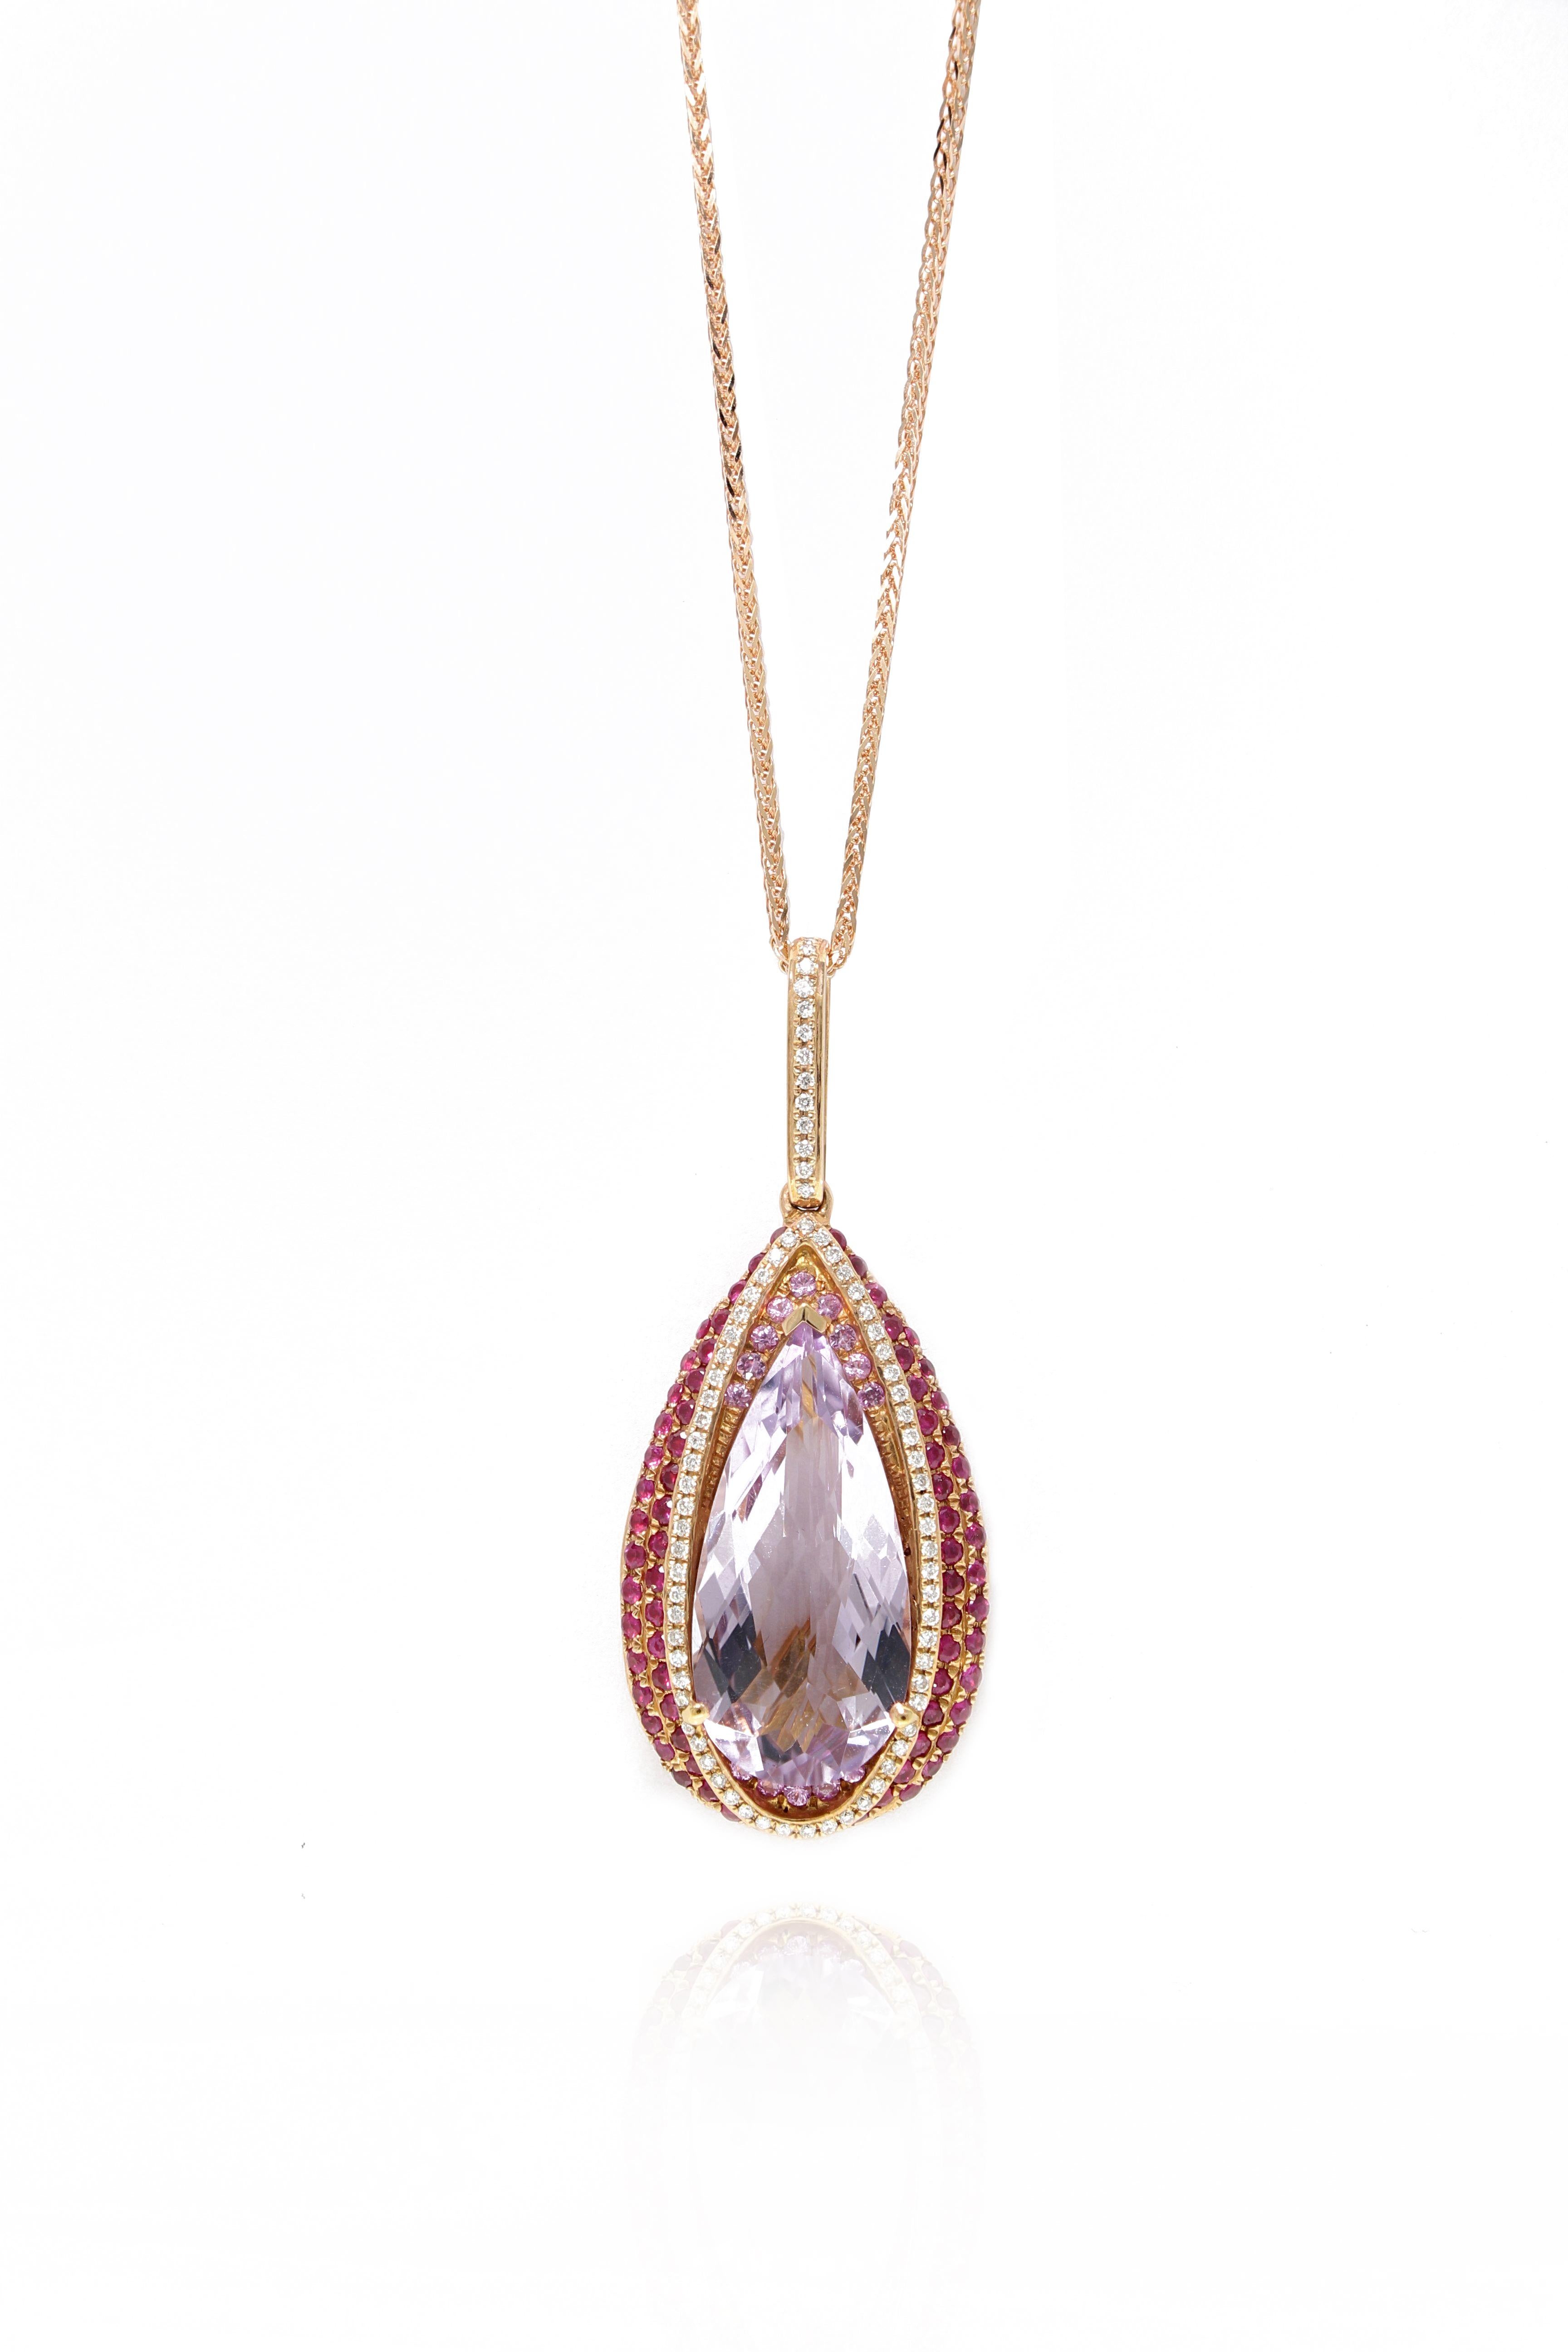 A natural amethyst and pink sapphire diamond pendant, centering a 7.8 carats pear-shaped amethyst, framed by brilliant cut diamonds totalling  0.21 ct diamonds, 0.93 ct rubies and 0.20 ct pink sapphire mounted in 18 karat rose gold. It is a fabulous